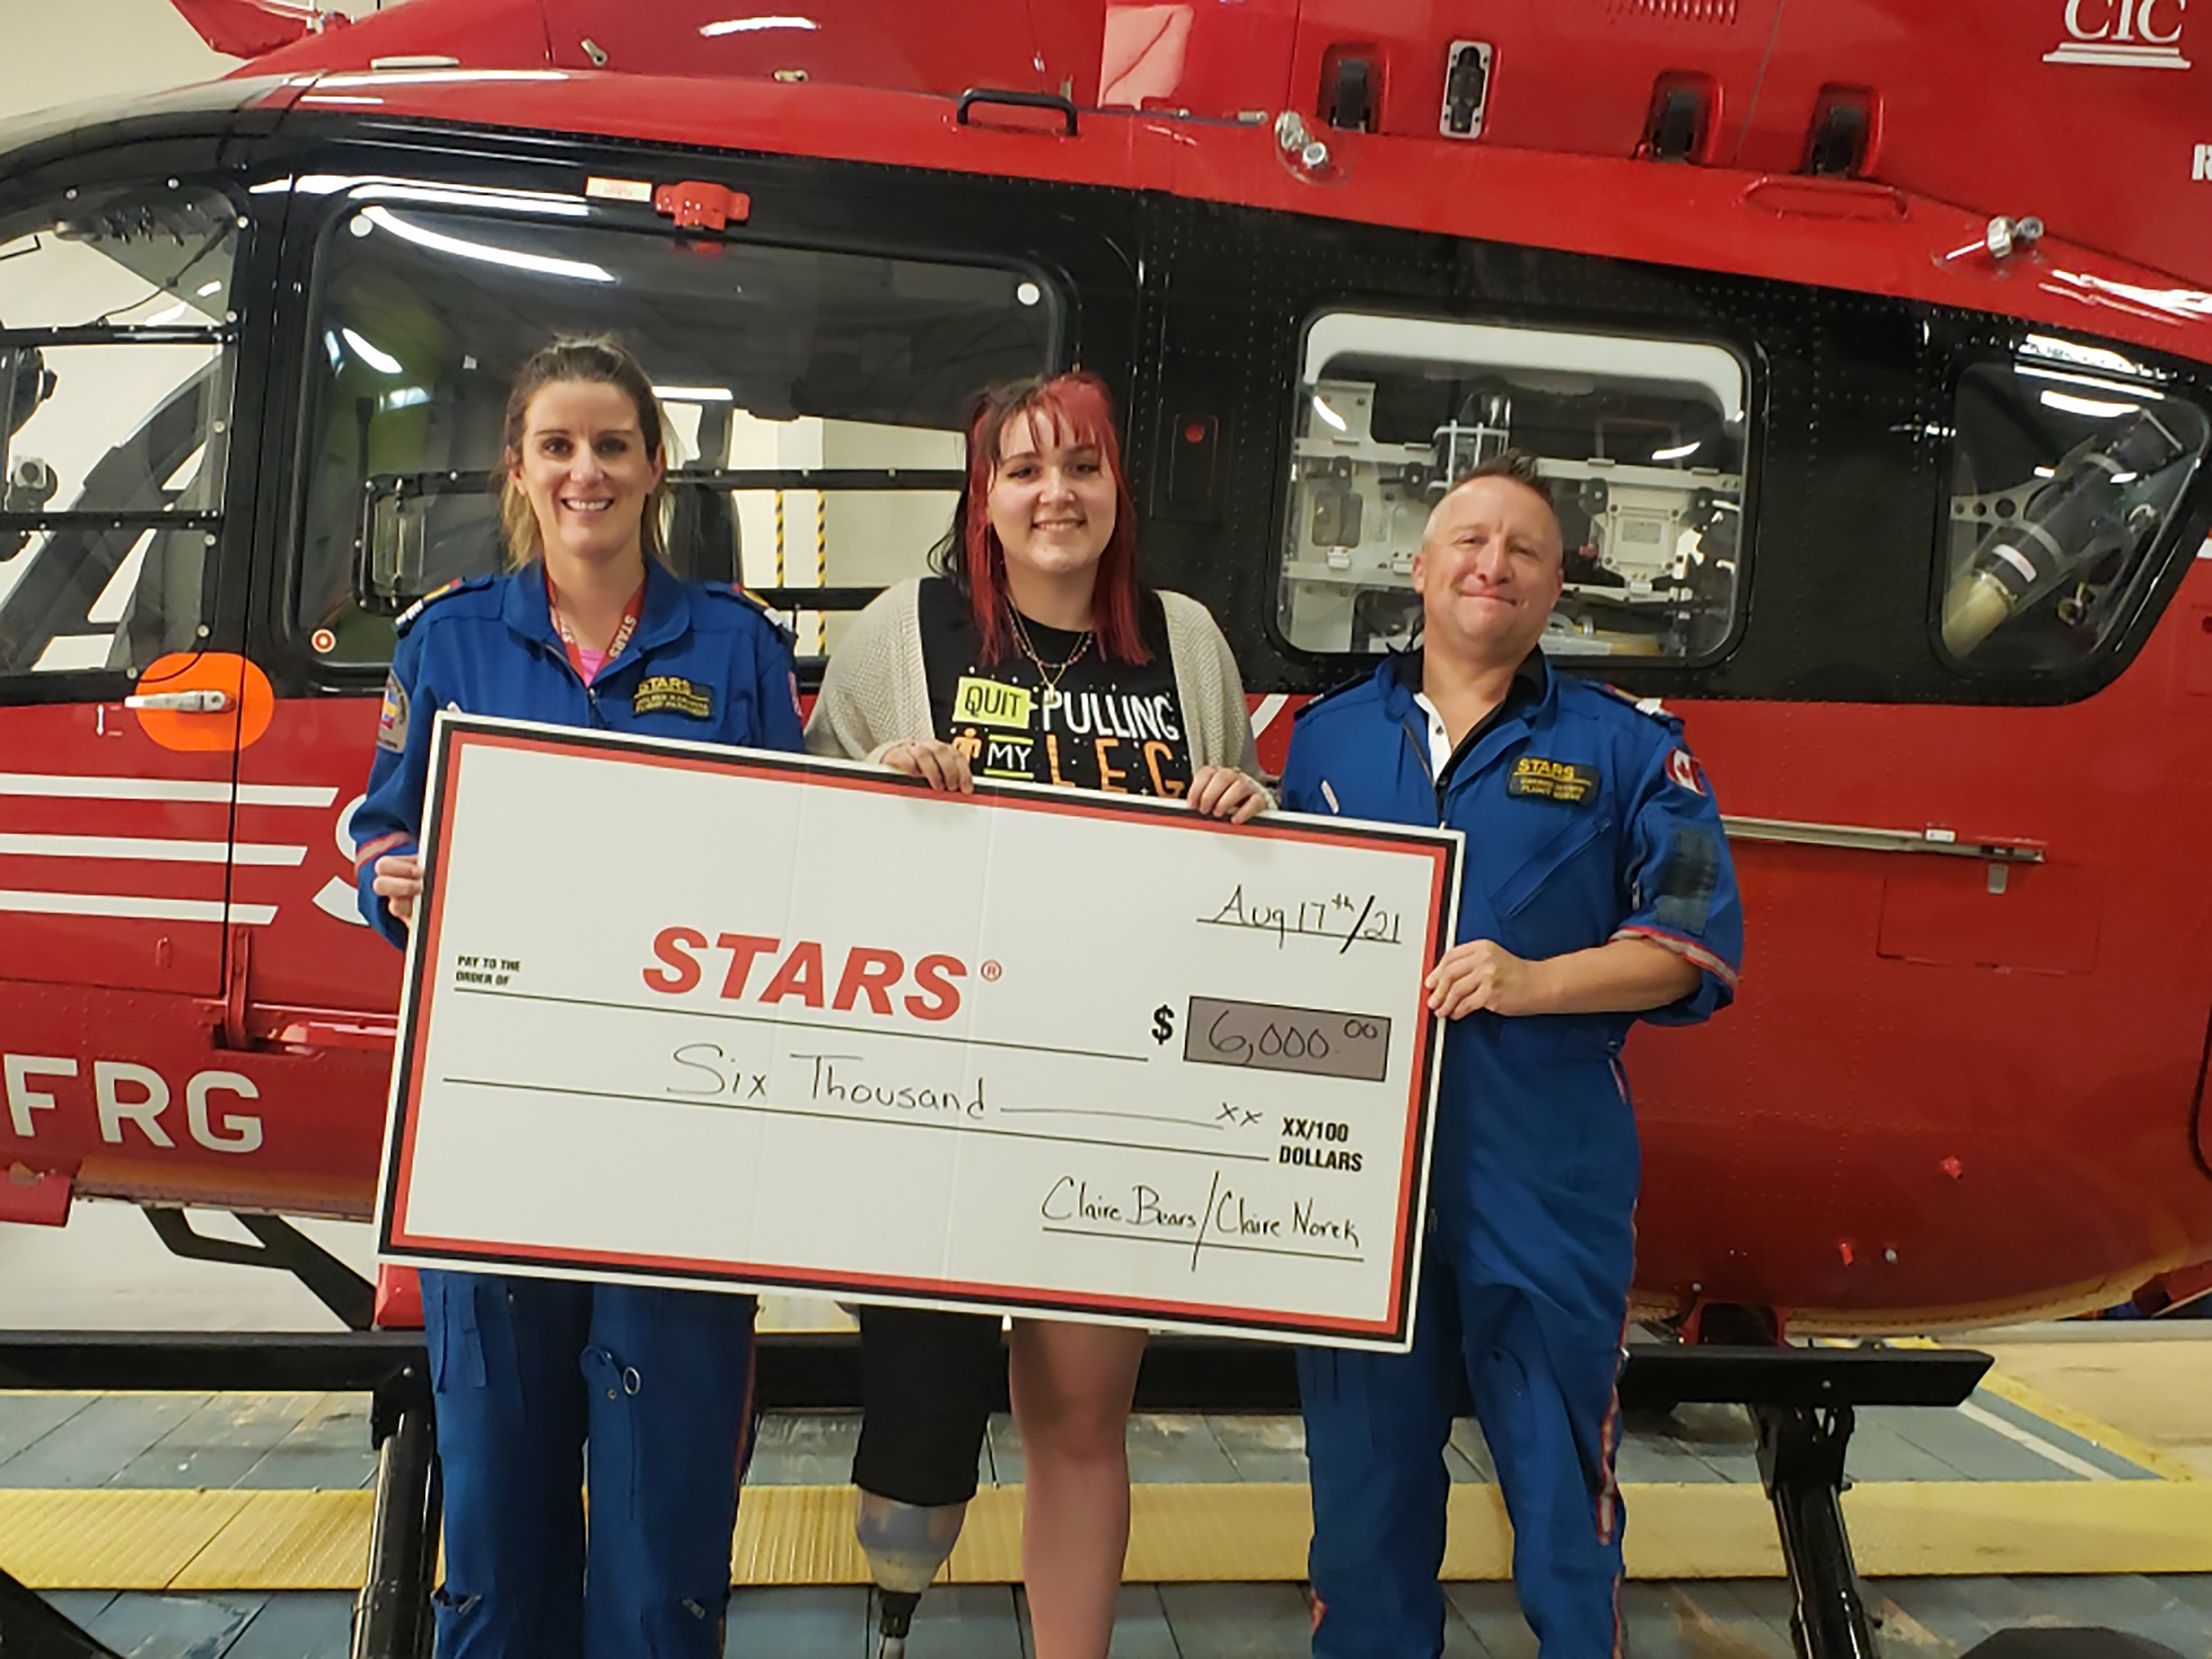 Claire present a cheque for $6,000 to Jolene Karapita and Darren Entner of STARS. The Claire Bear fundraiser raised $6,500 for the Norek family. They decided to pay it forward by donating the funds to STARS and the Esterhazy Fire Department.